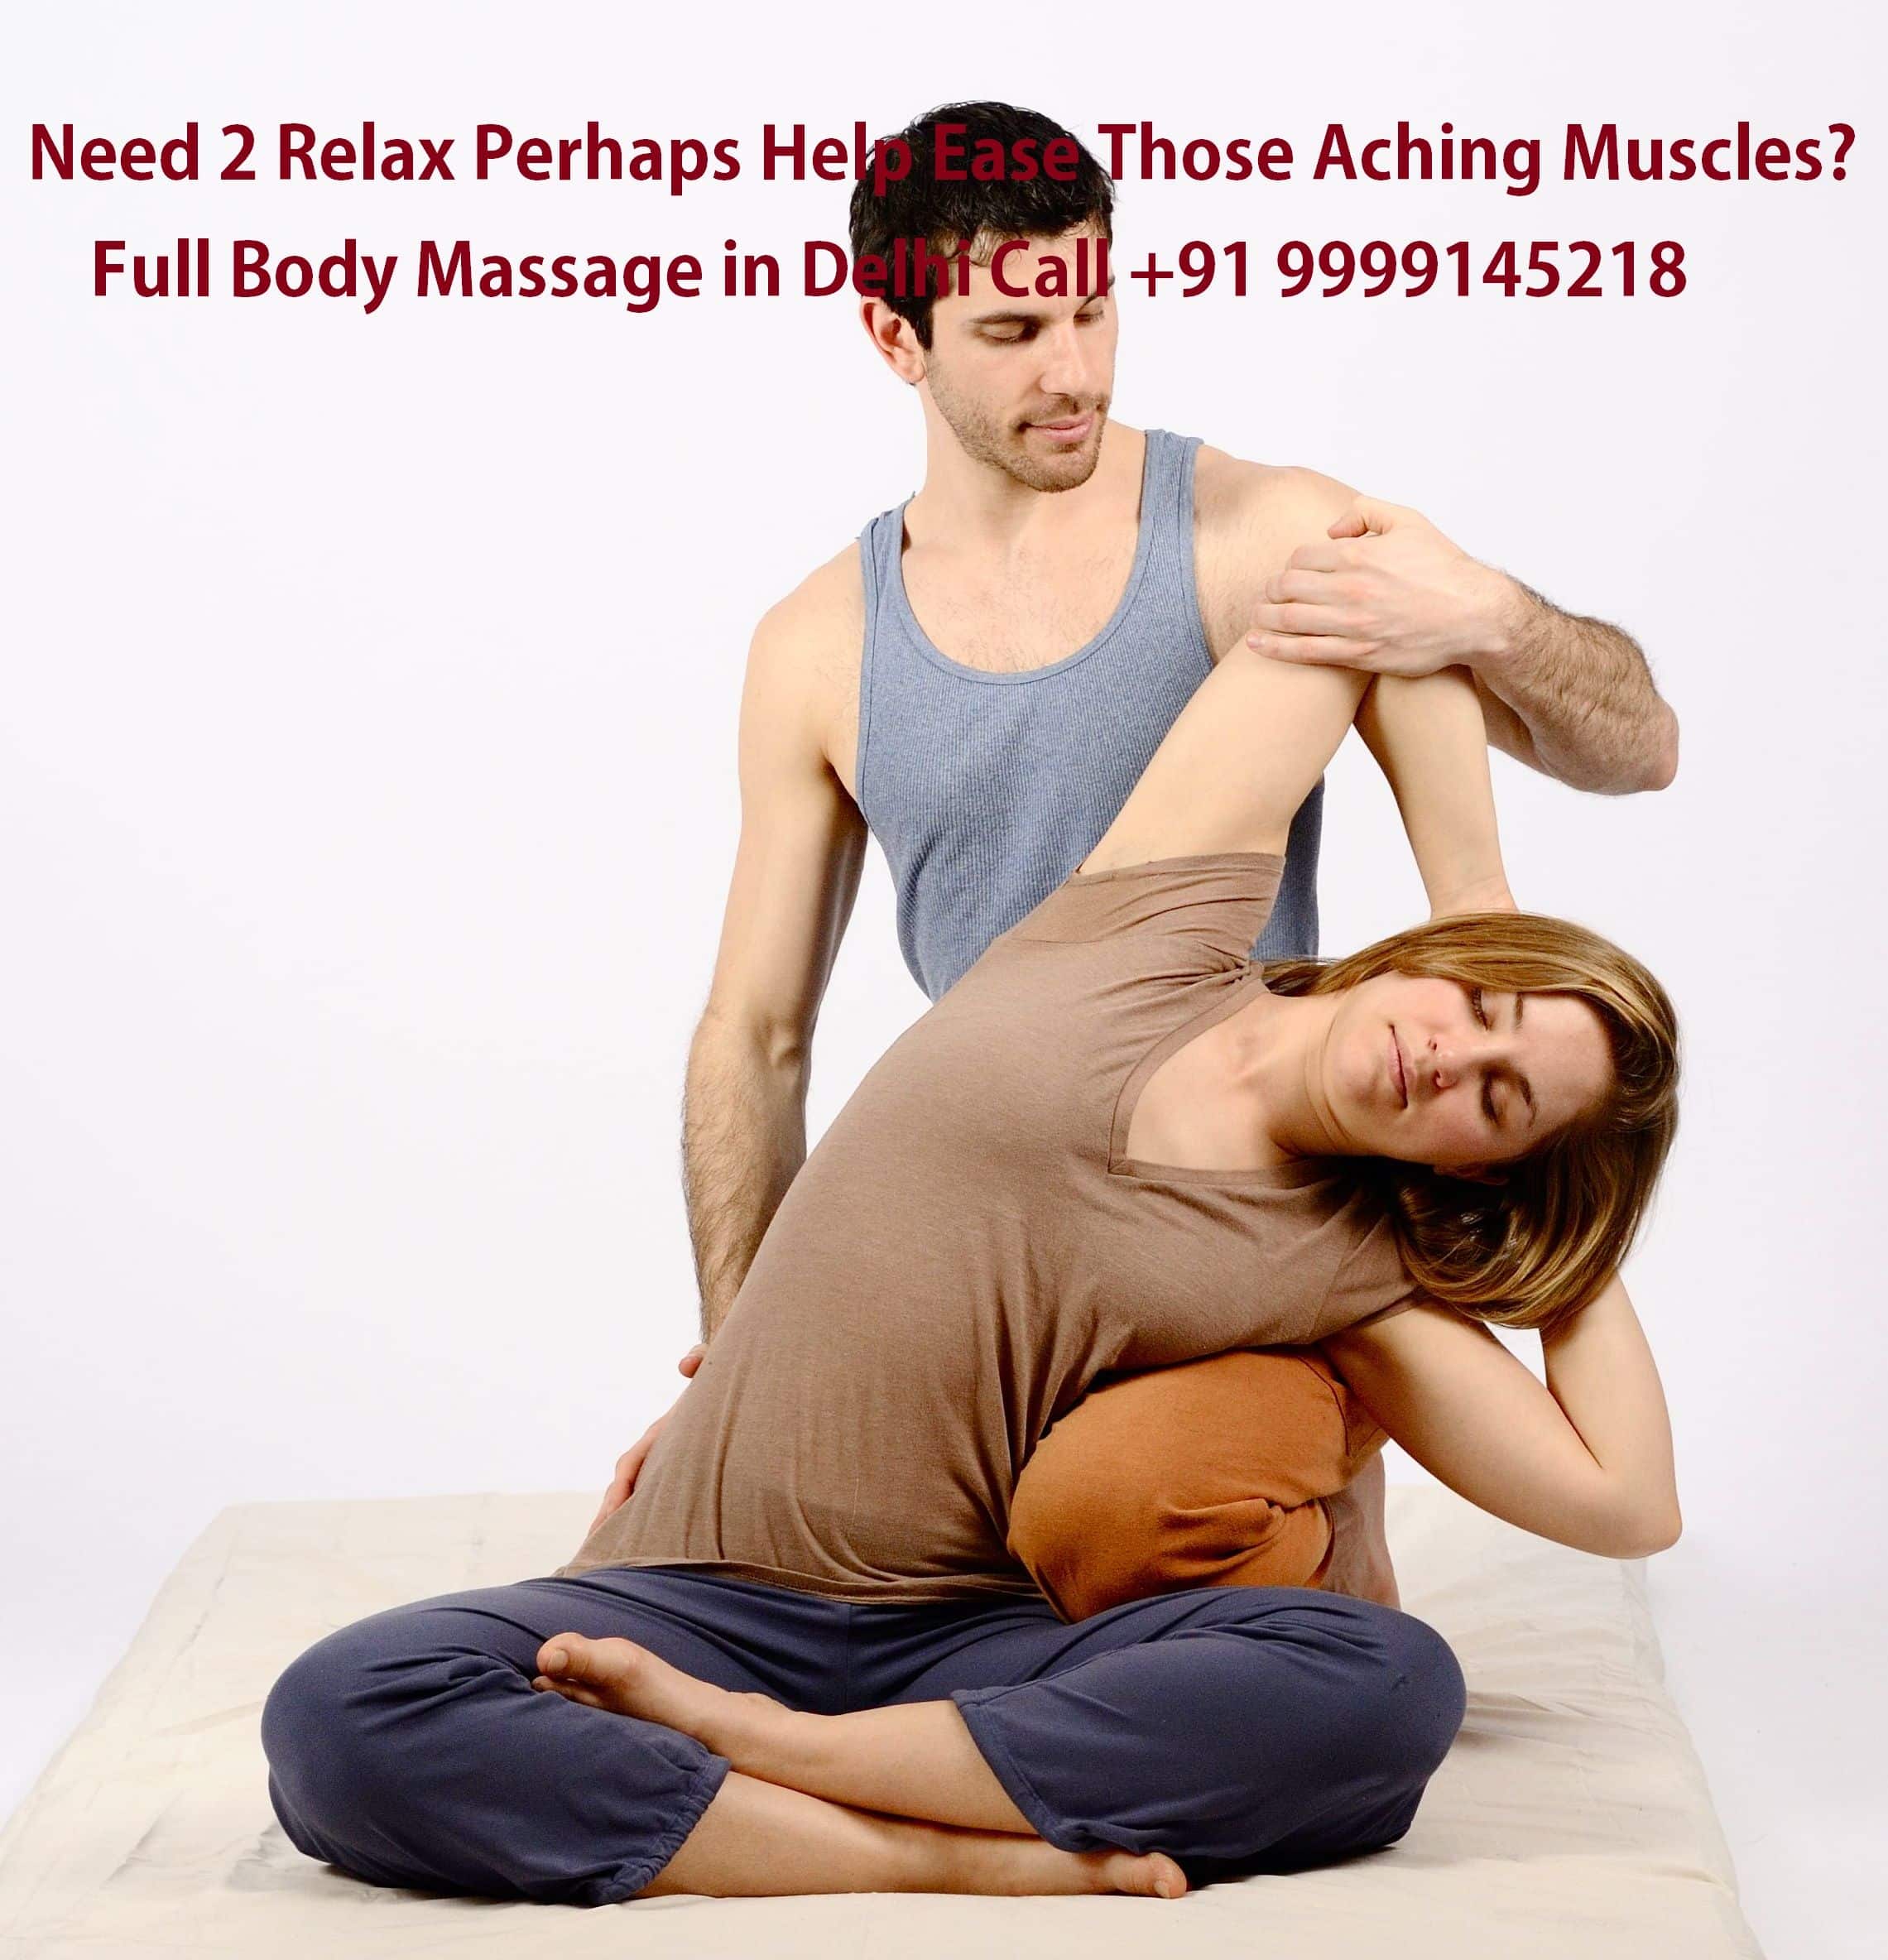 Need 2 #Relax Perhaps Help Ease Those Aching Muscles? Full Body Massage ...